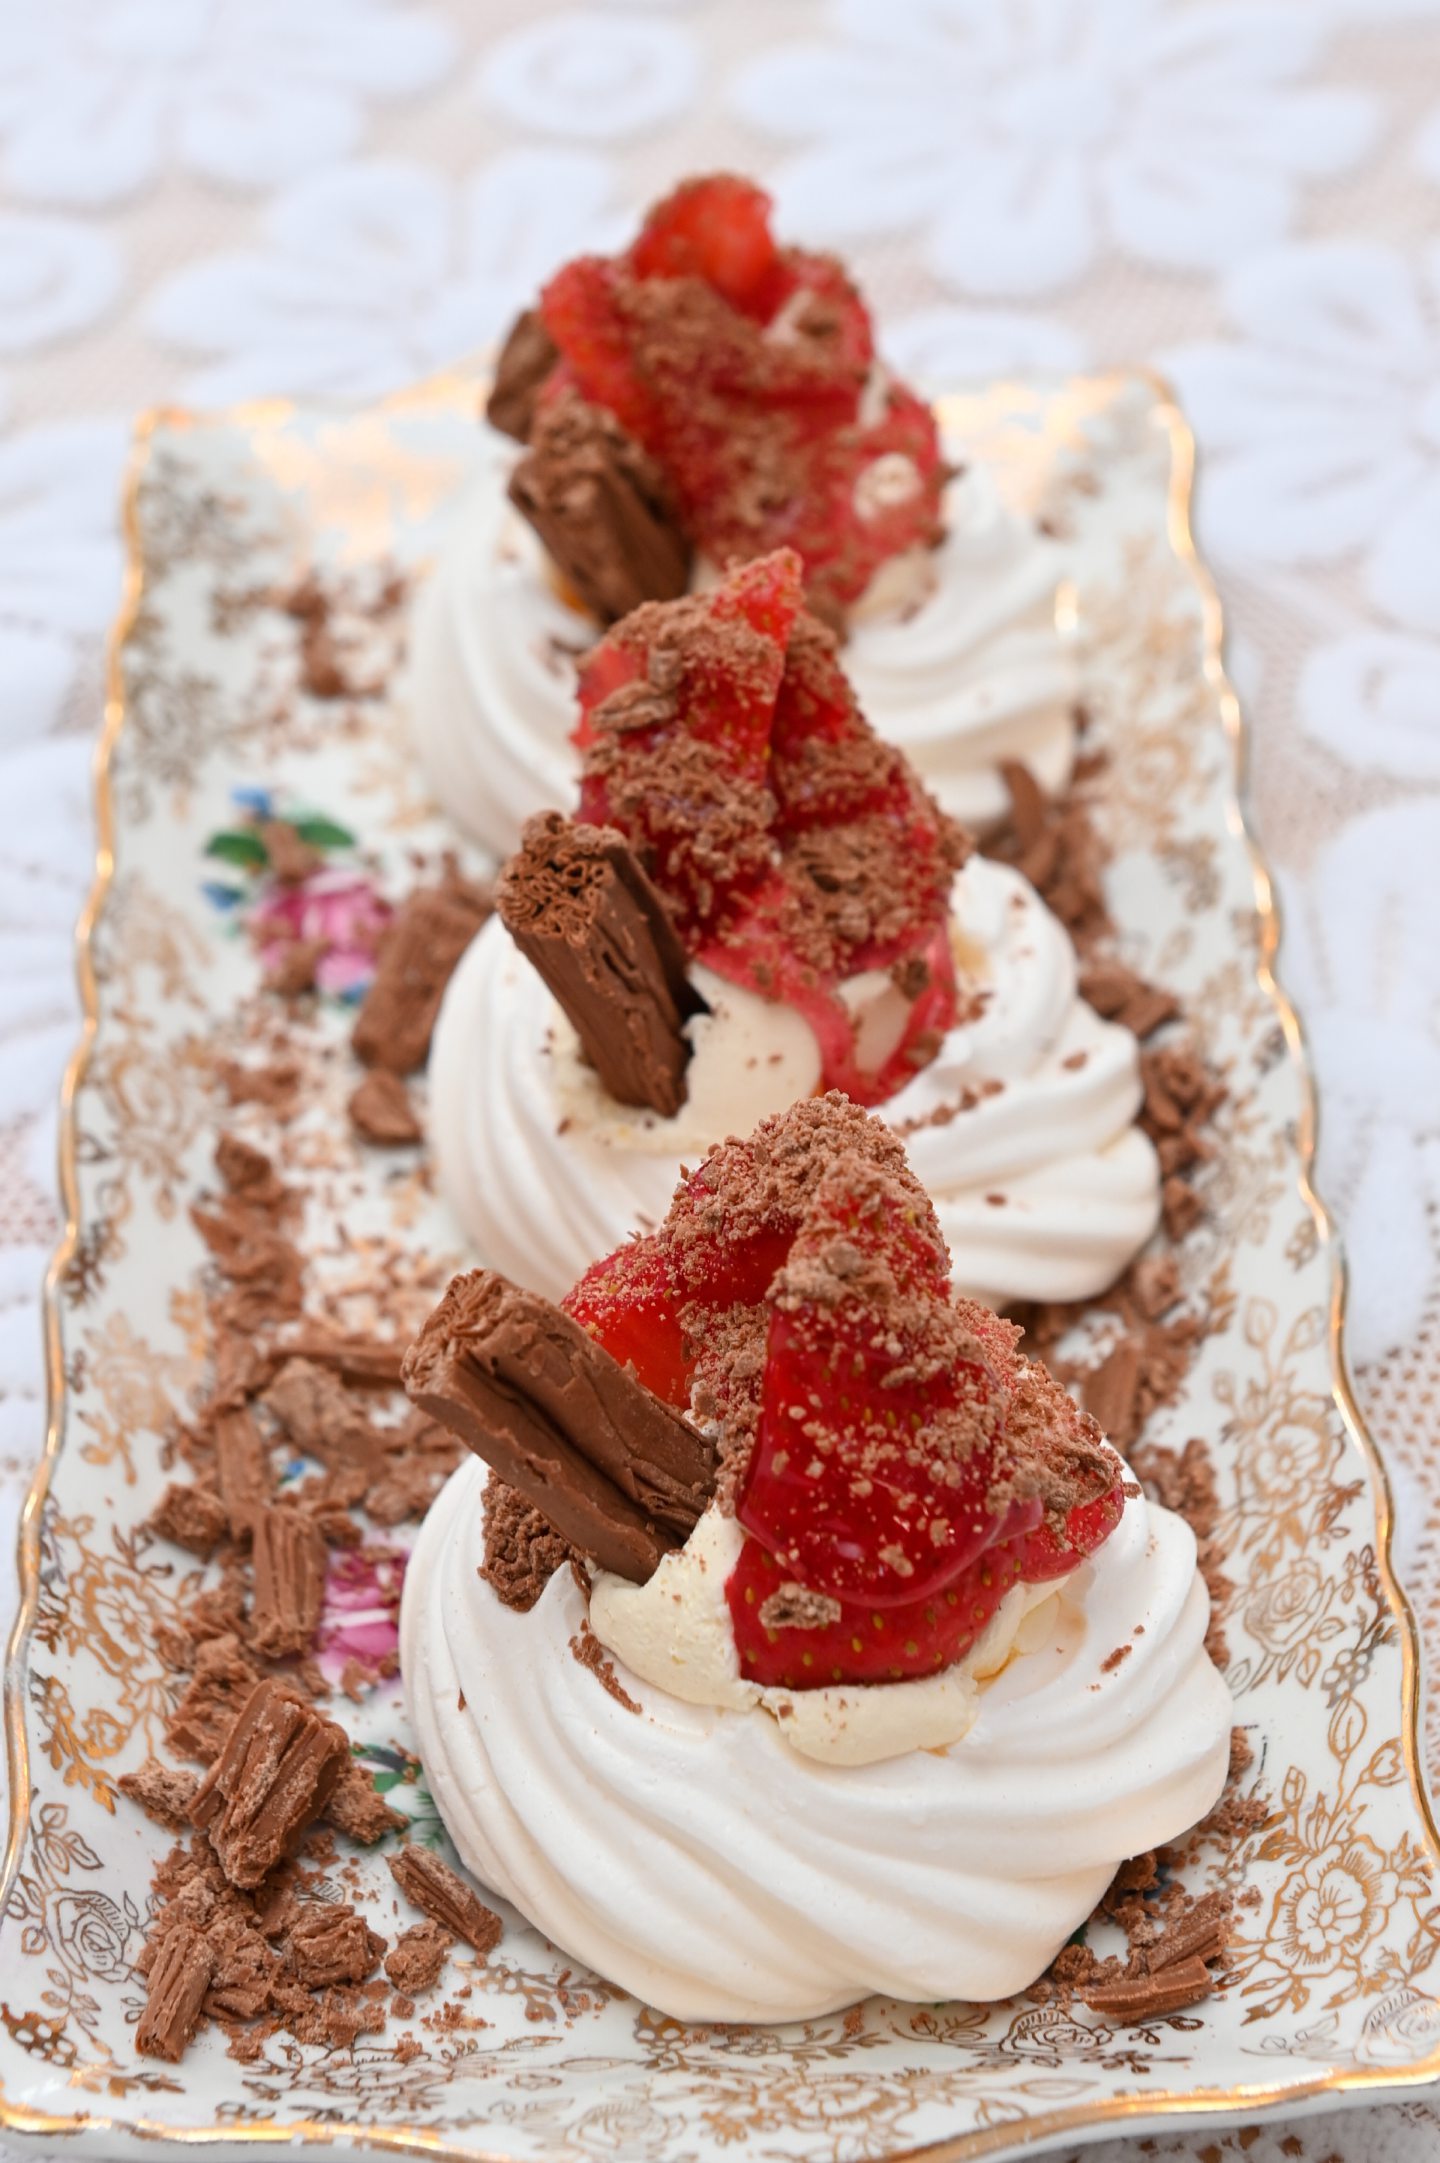 Three strawberry meringues from Nooks & Crannies with chocolate flakes on top